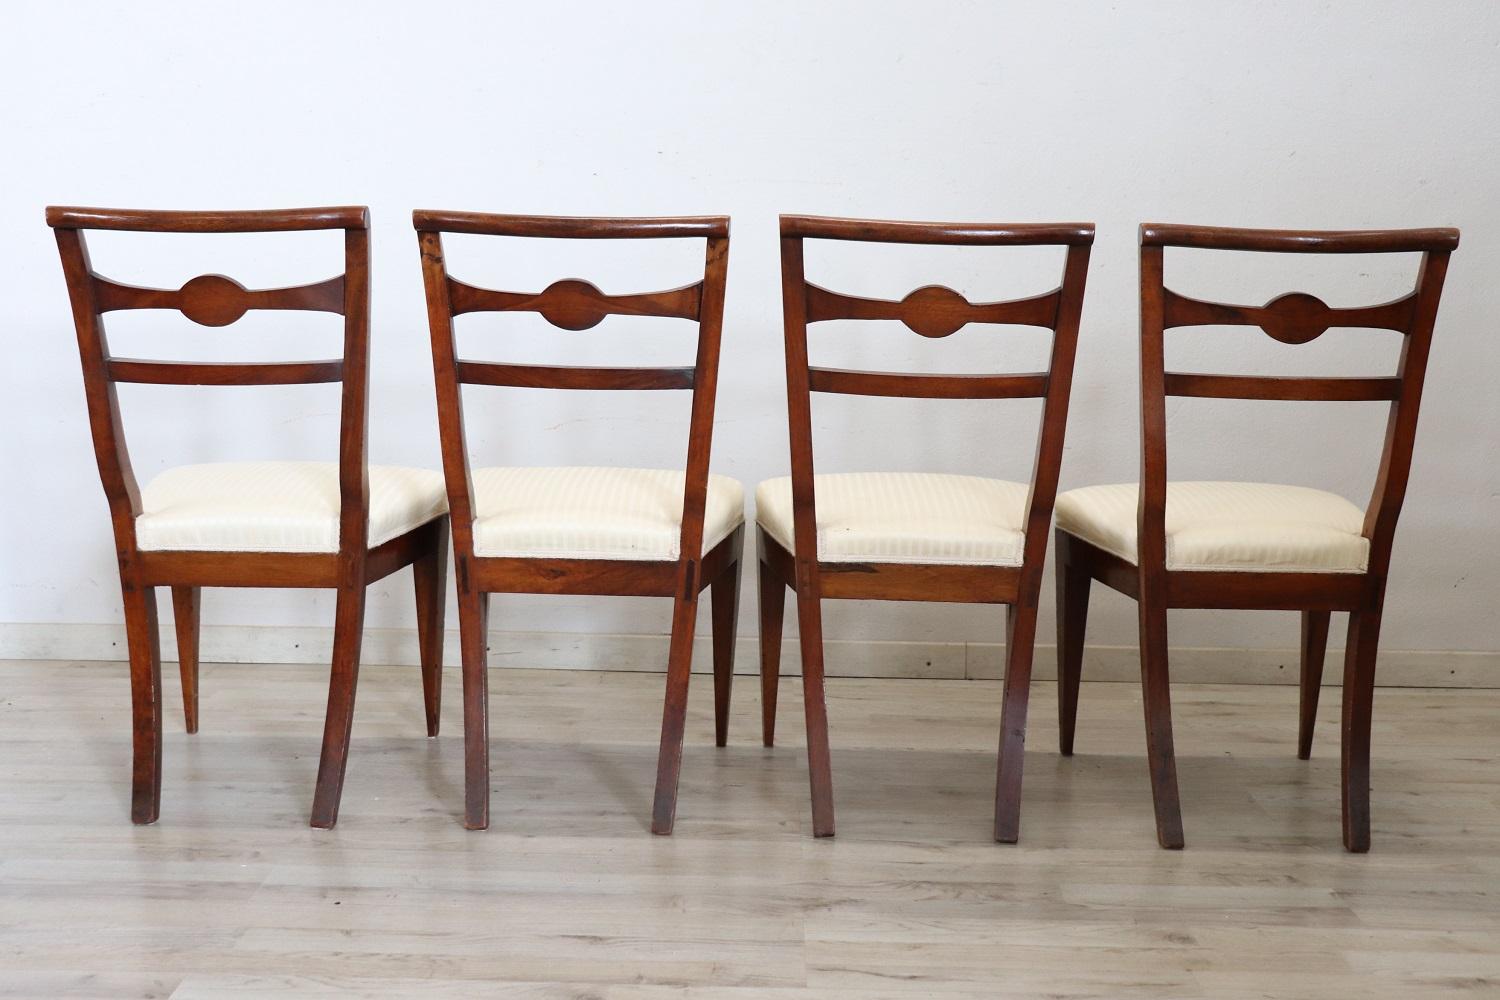 Late 18th Century Italian Directoire Antique Dining Room Chairs, Set of Four 5